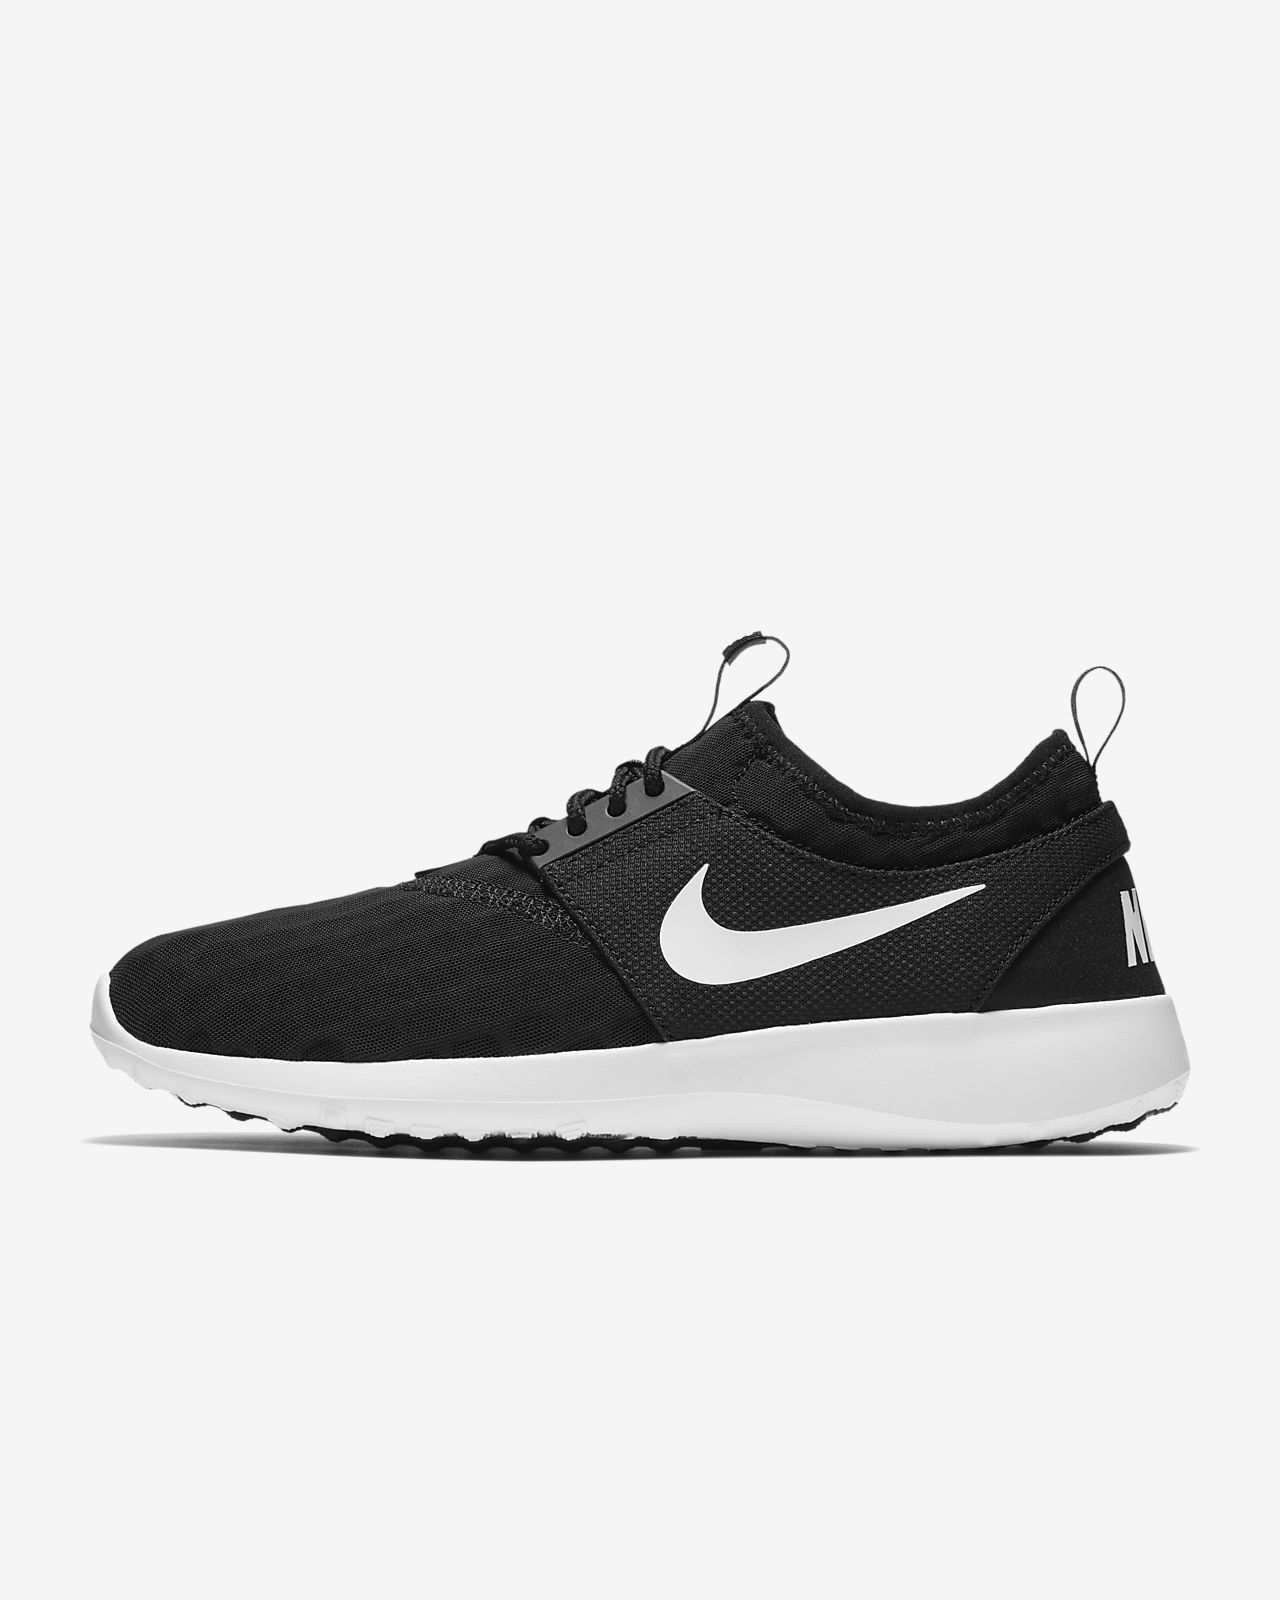 nike mens shoes online